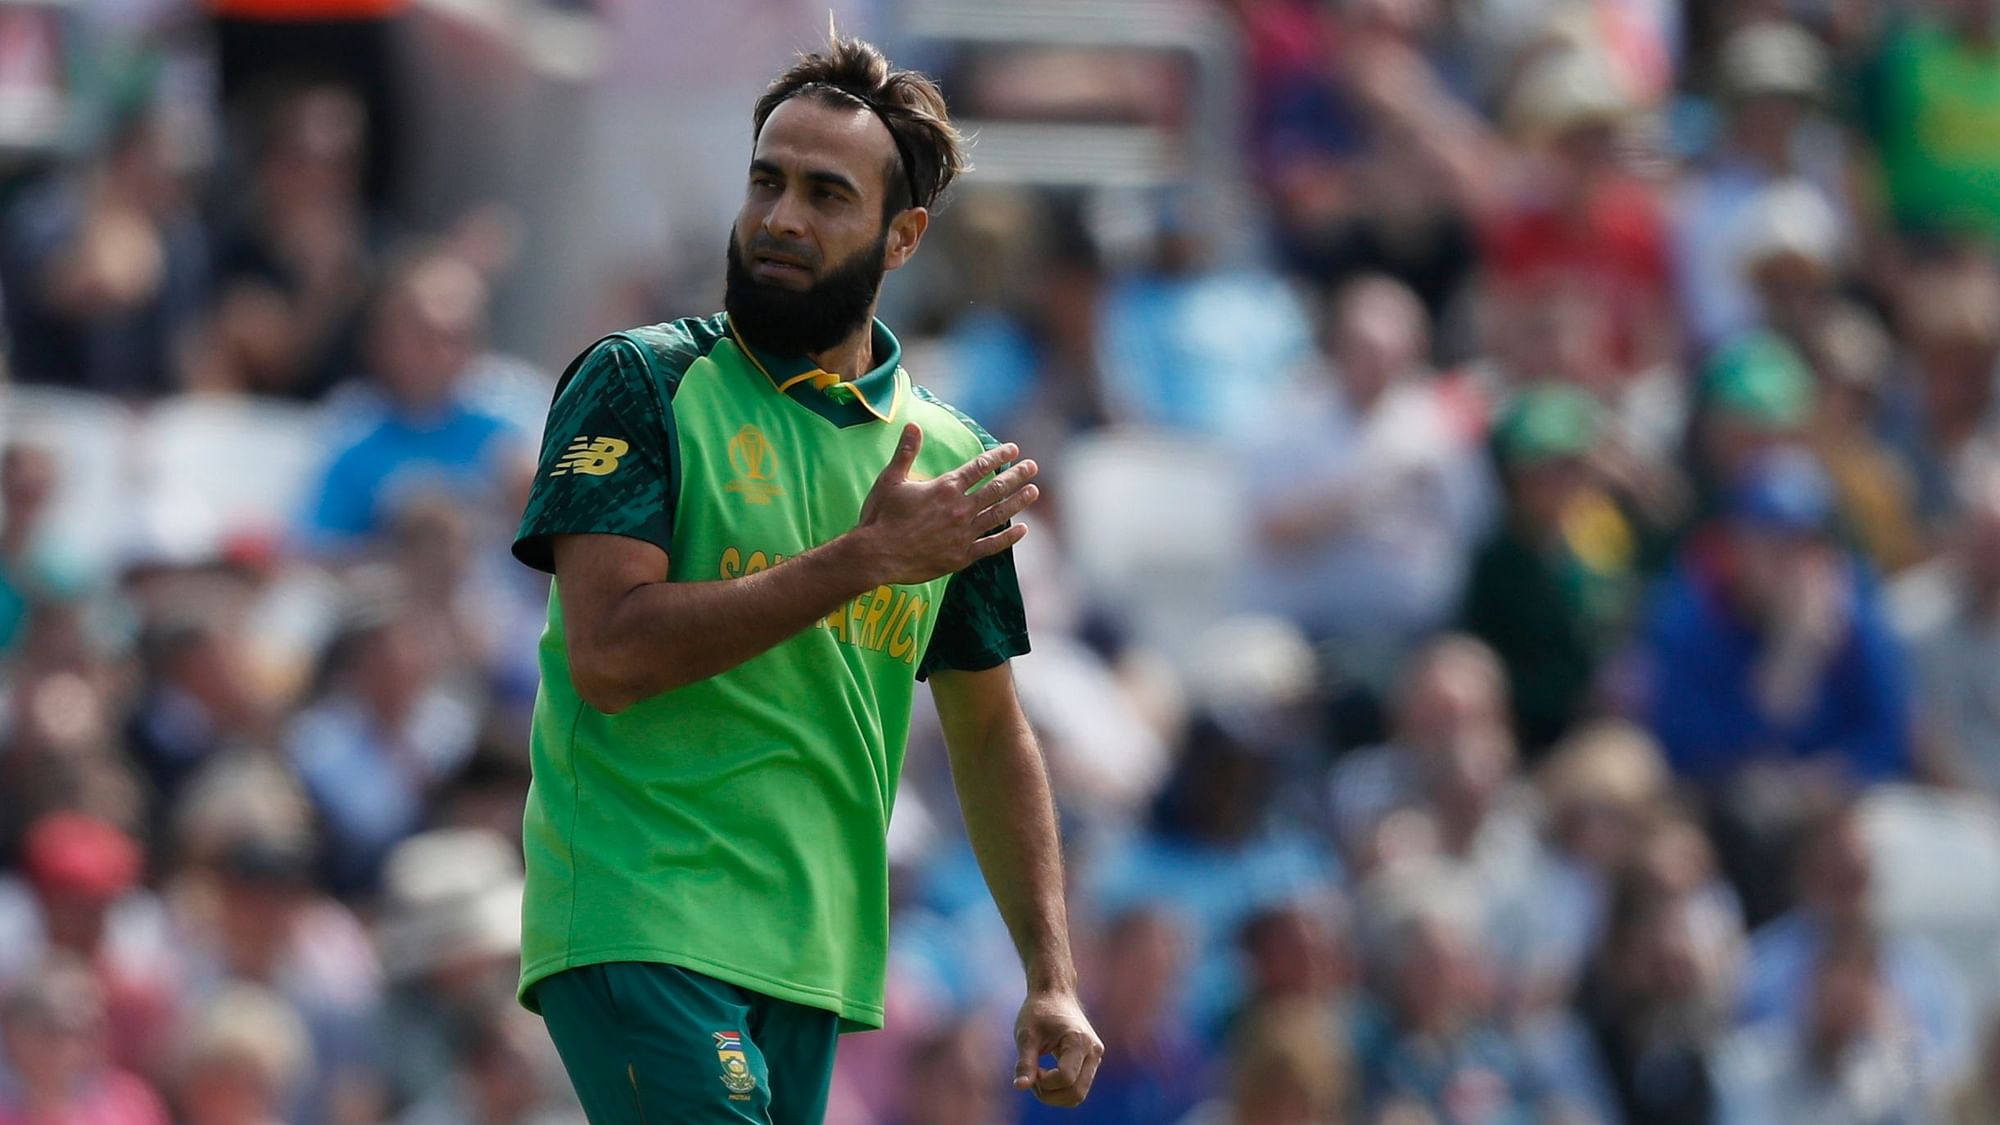 Imran Tahir continued his sensational IPL form by picking a wicket in the first over of the World Cup.